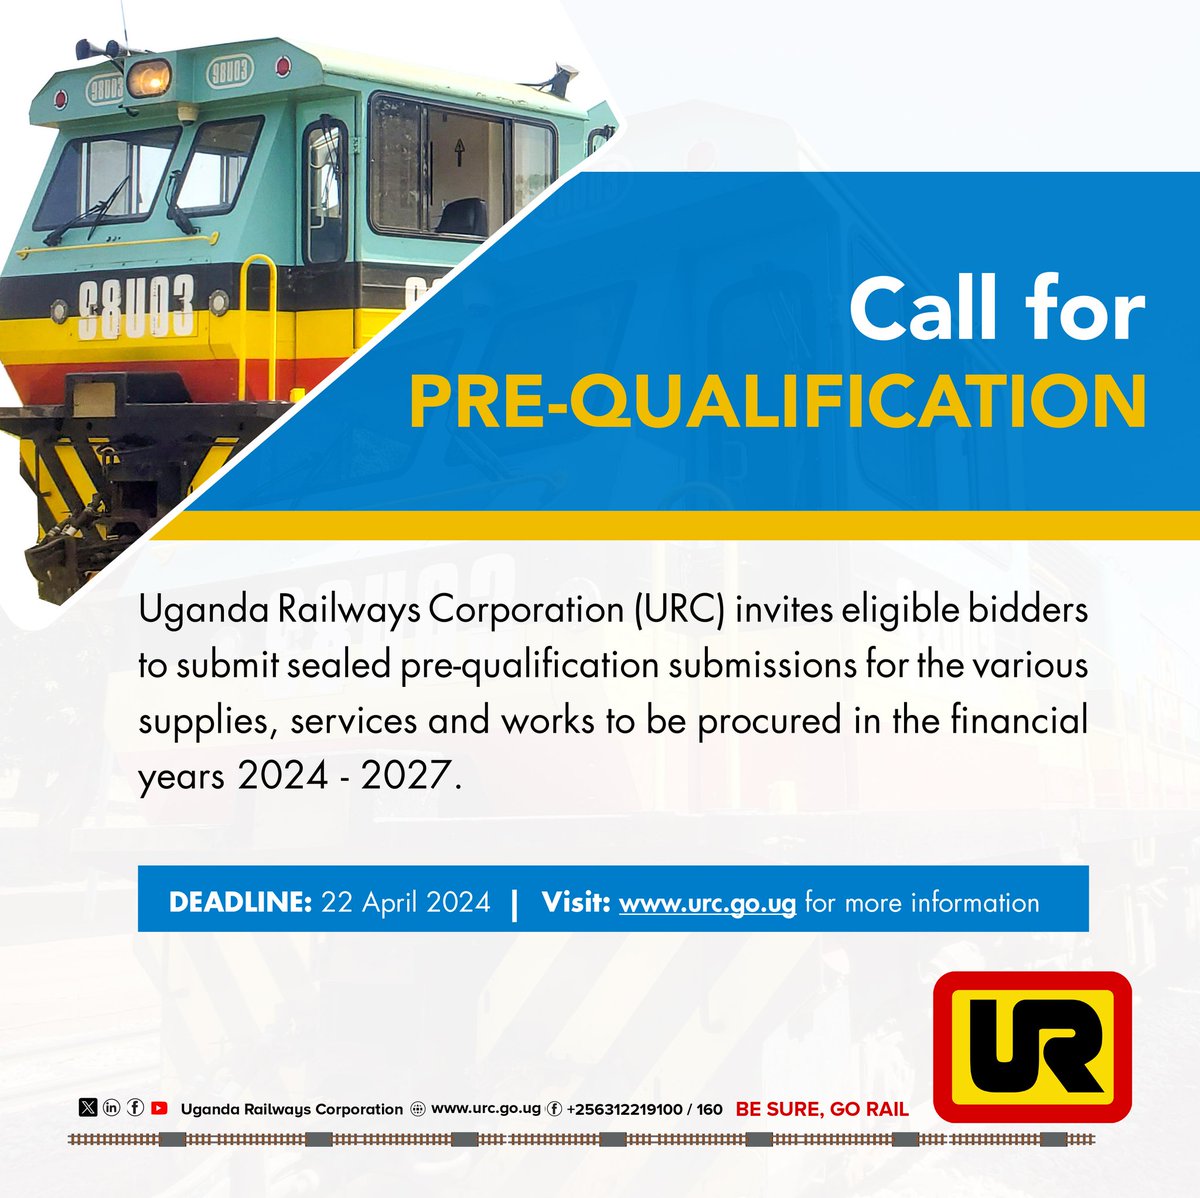 In a bid to improve its services, URC is undertaking different works. We thus invite eligible providers to be part of this transformation journey.